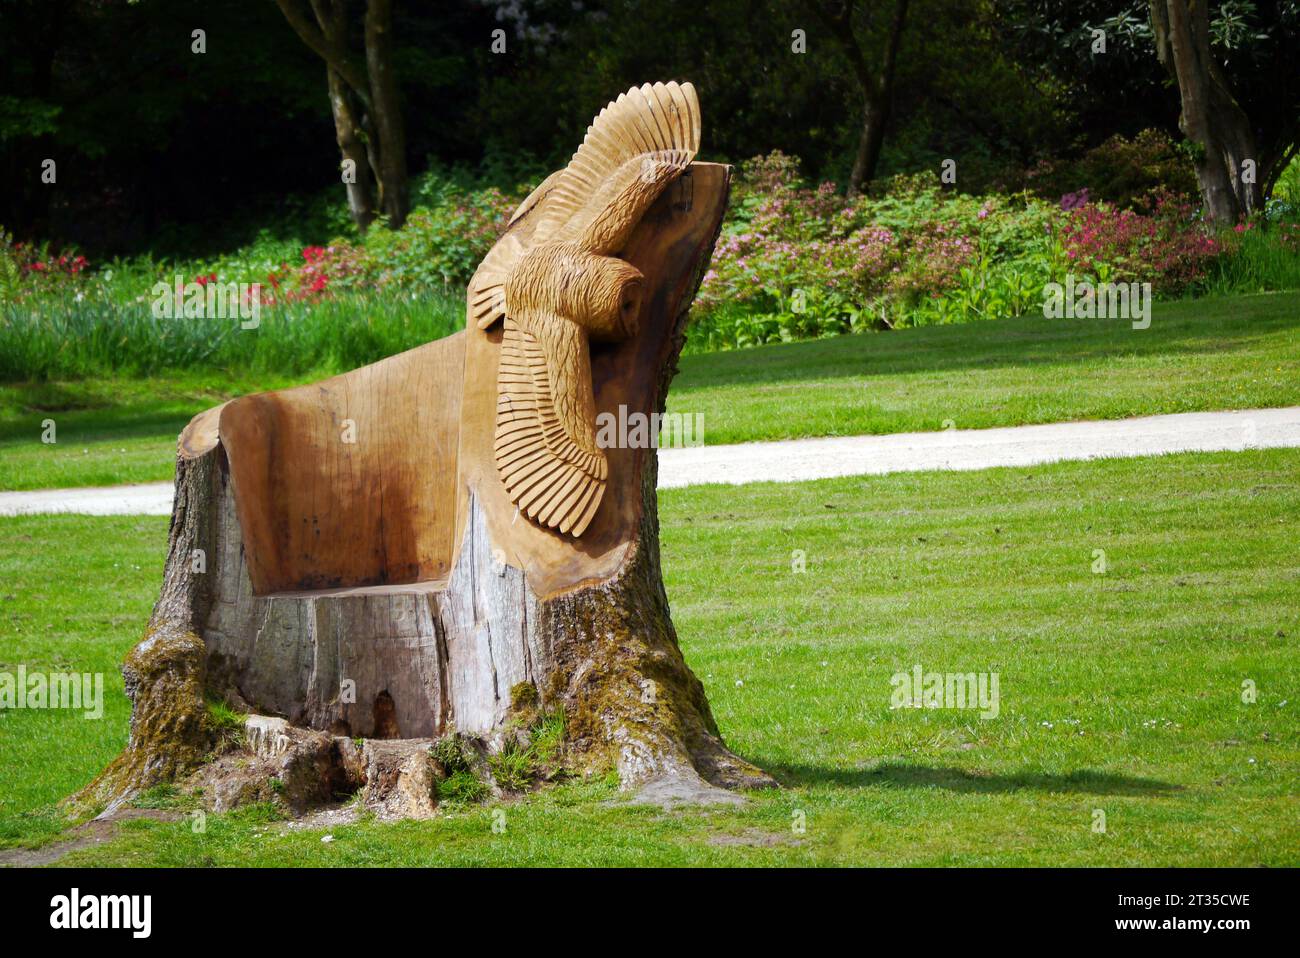 Chainsaw Carved Sculpture of a Seat with Flying Barn Owl by Karl Barker in the Himalayan Garden & Sculpture Park, North Yorkshire, England, UK. Stock Photo